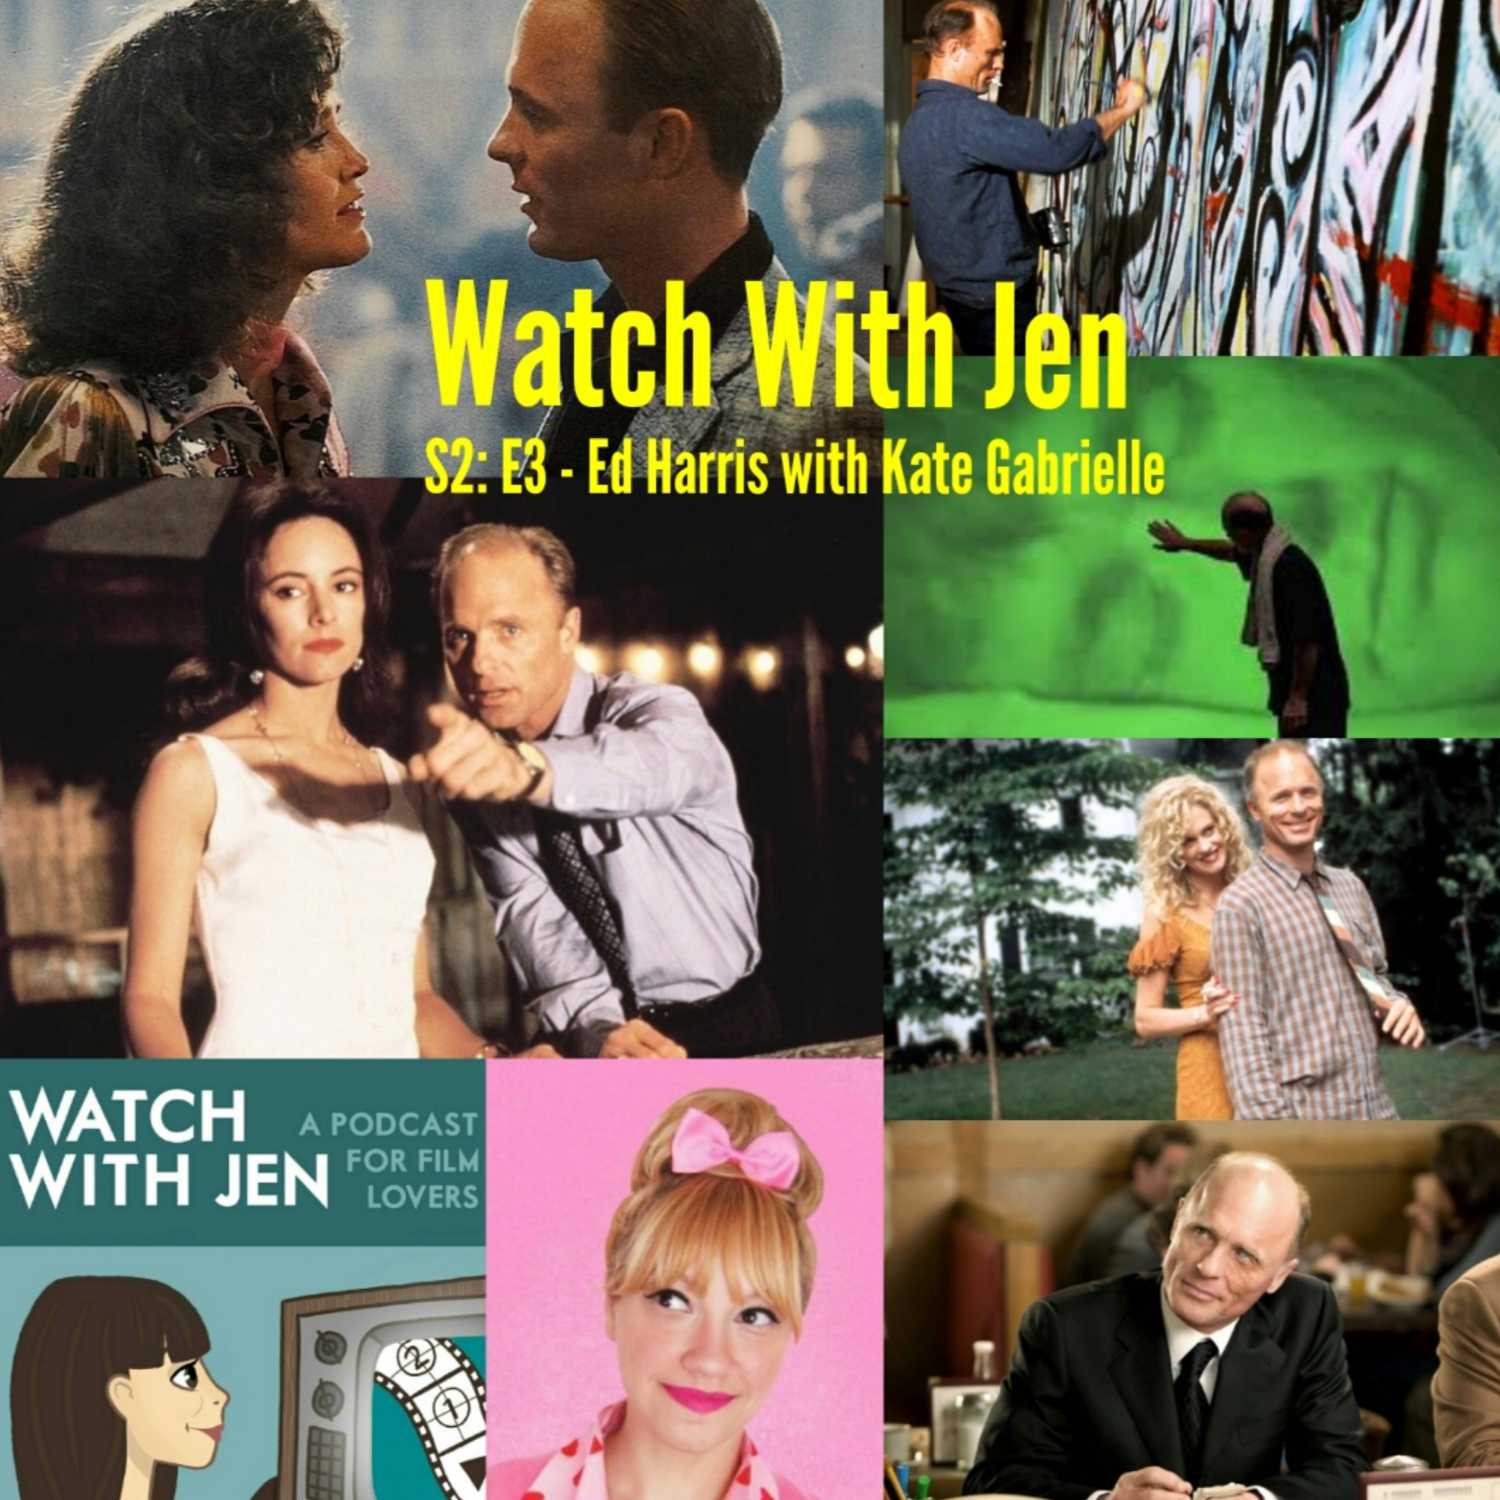 Watch With Jen - S2: E3 - Ed Harris with Kate Gabrielle